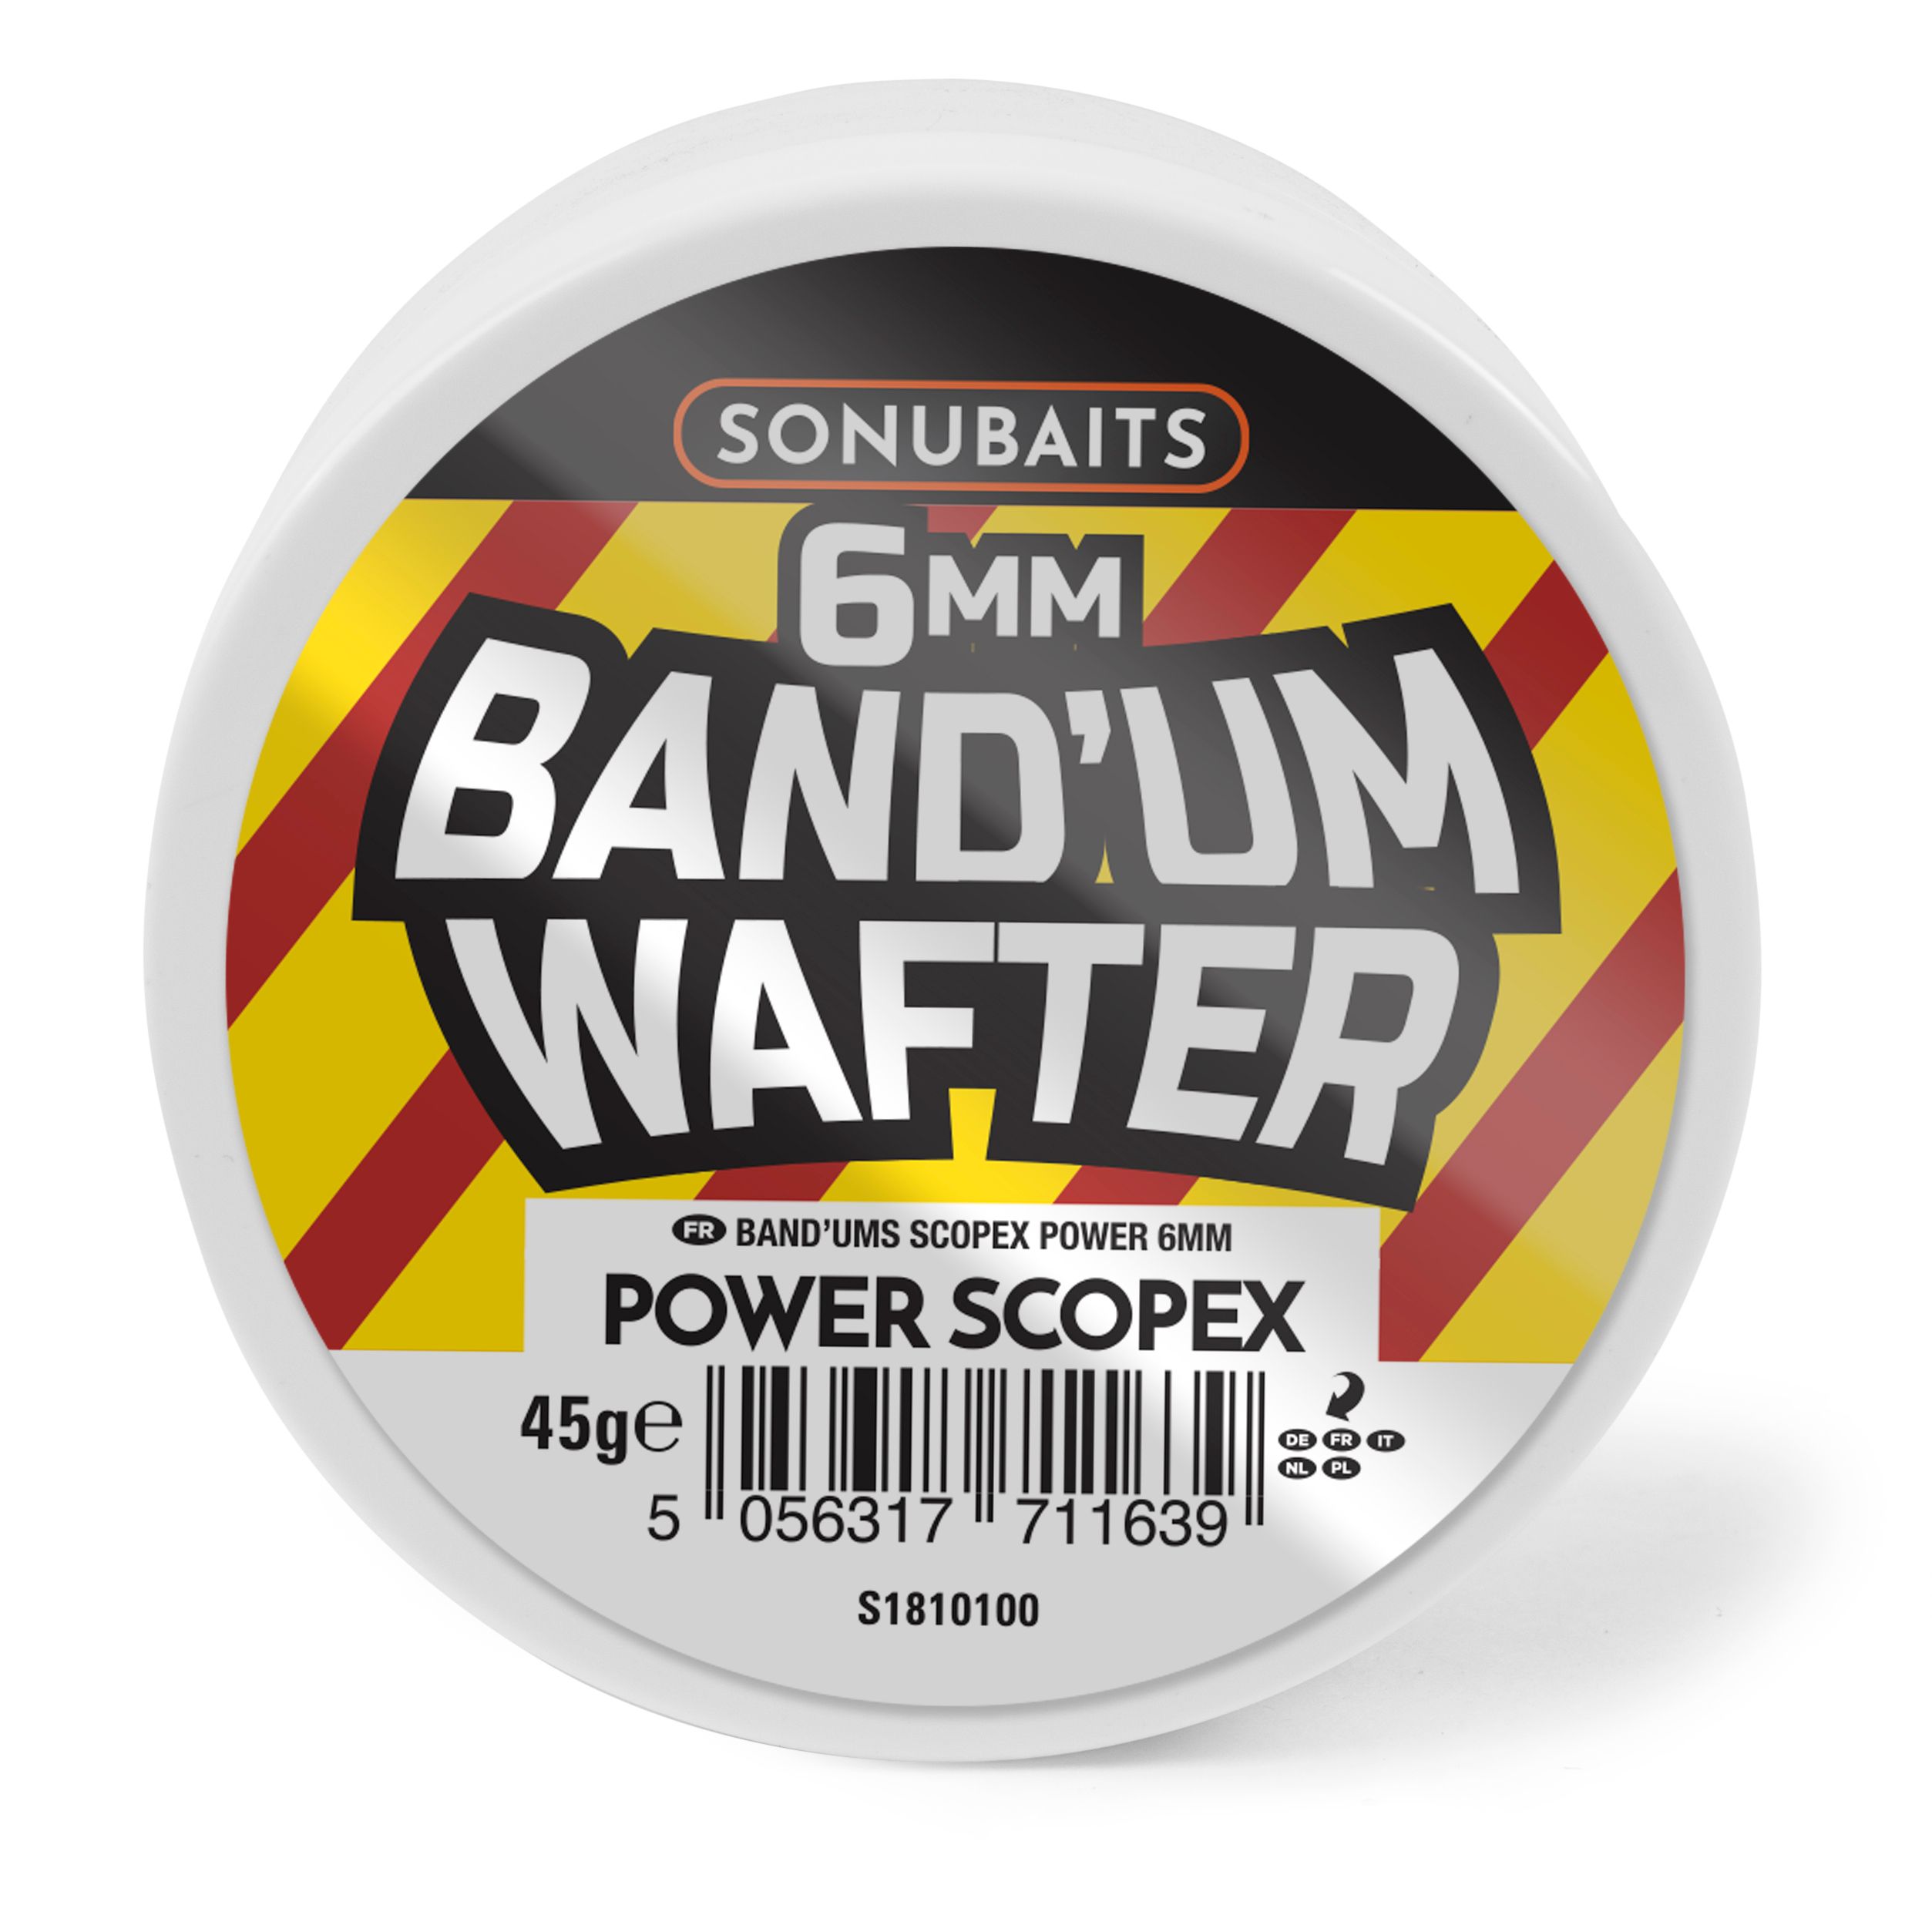 Sonubaits Band'um Wafters Power Scopex 6mm